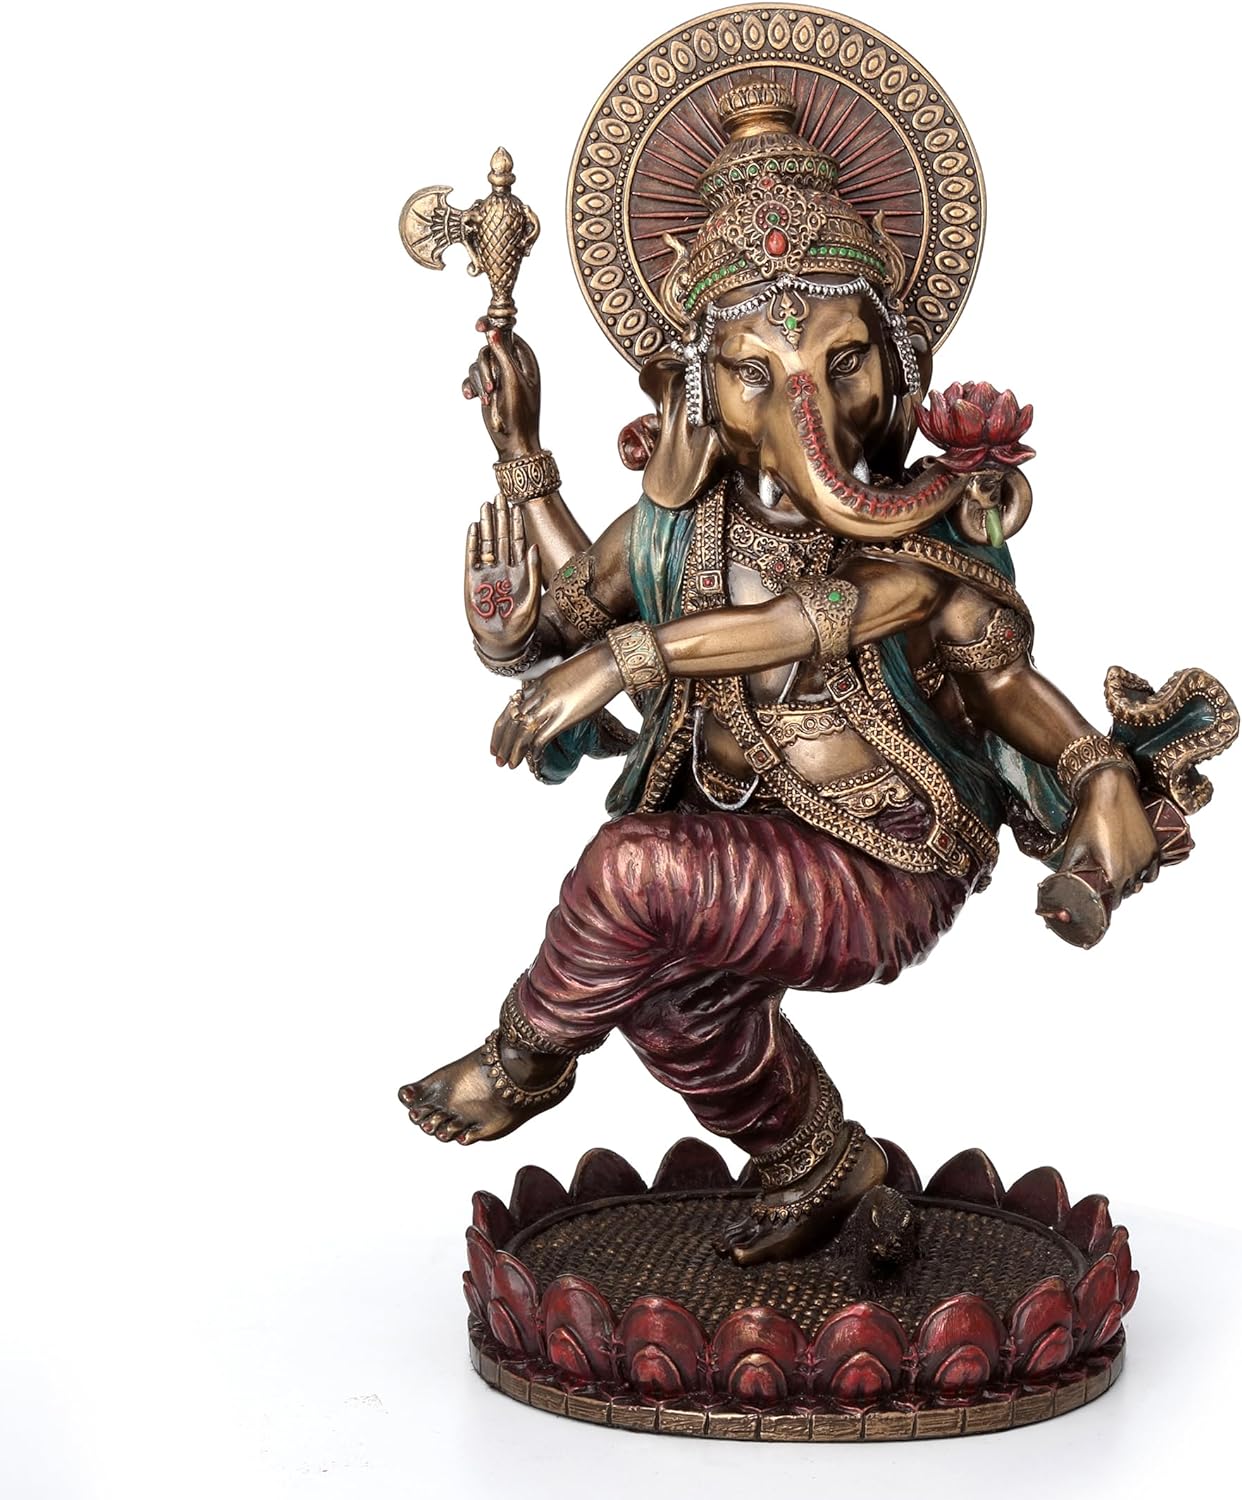 Dancing Ganesha Statue: Bring Serenity & Overcome Obstacles - 8.25"